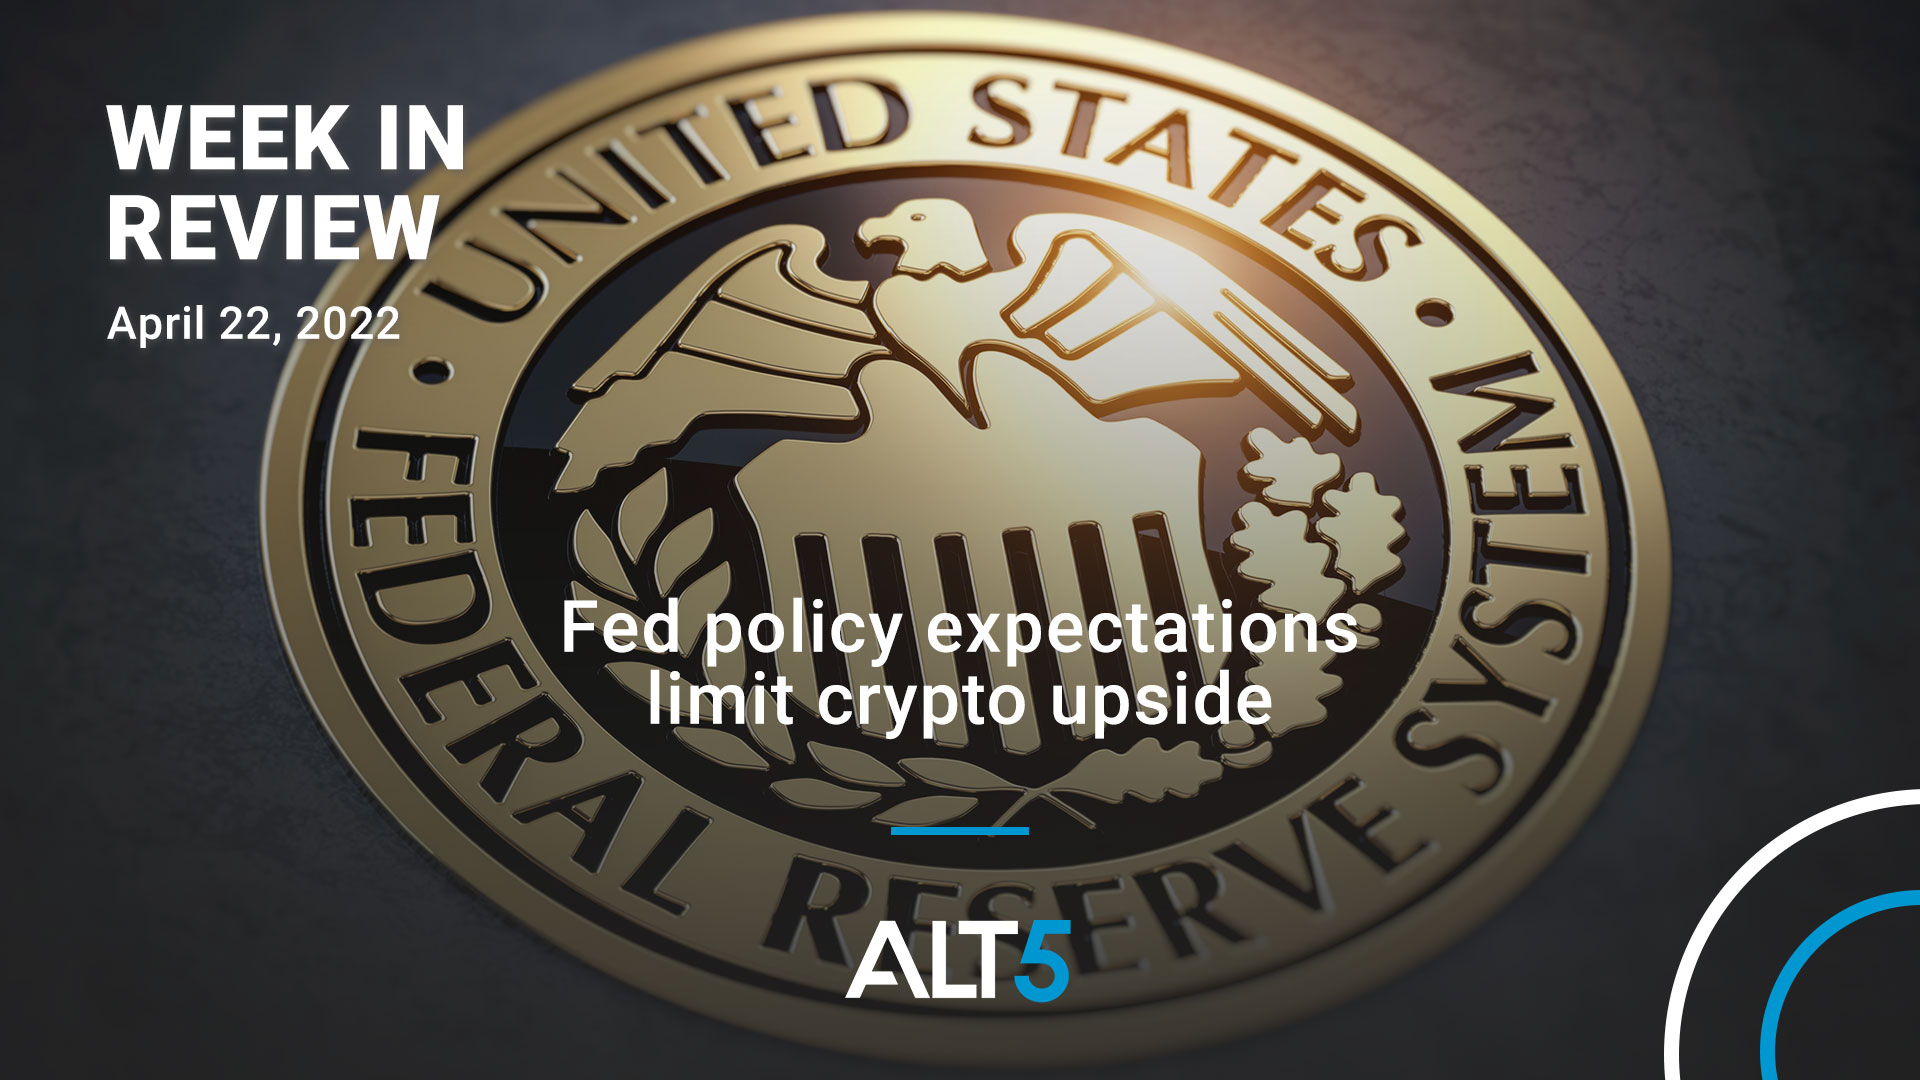 Week in review: April 22 2022 - Fed Policy Expectations Limit Crypto Upside